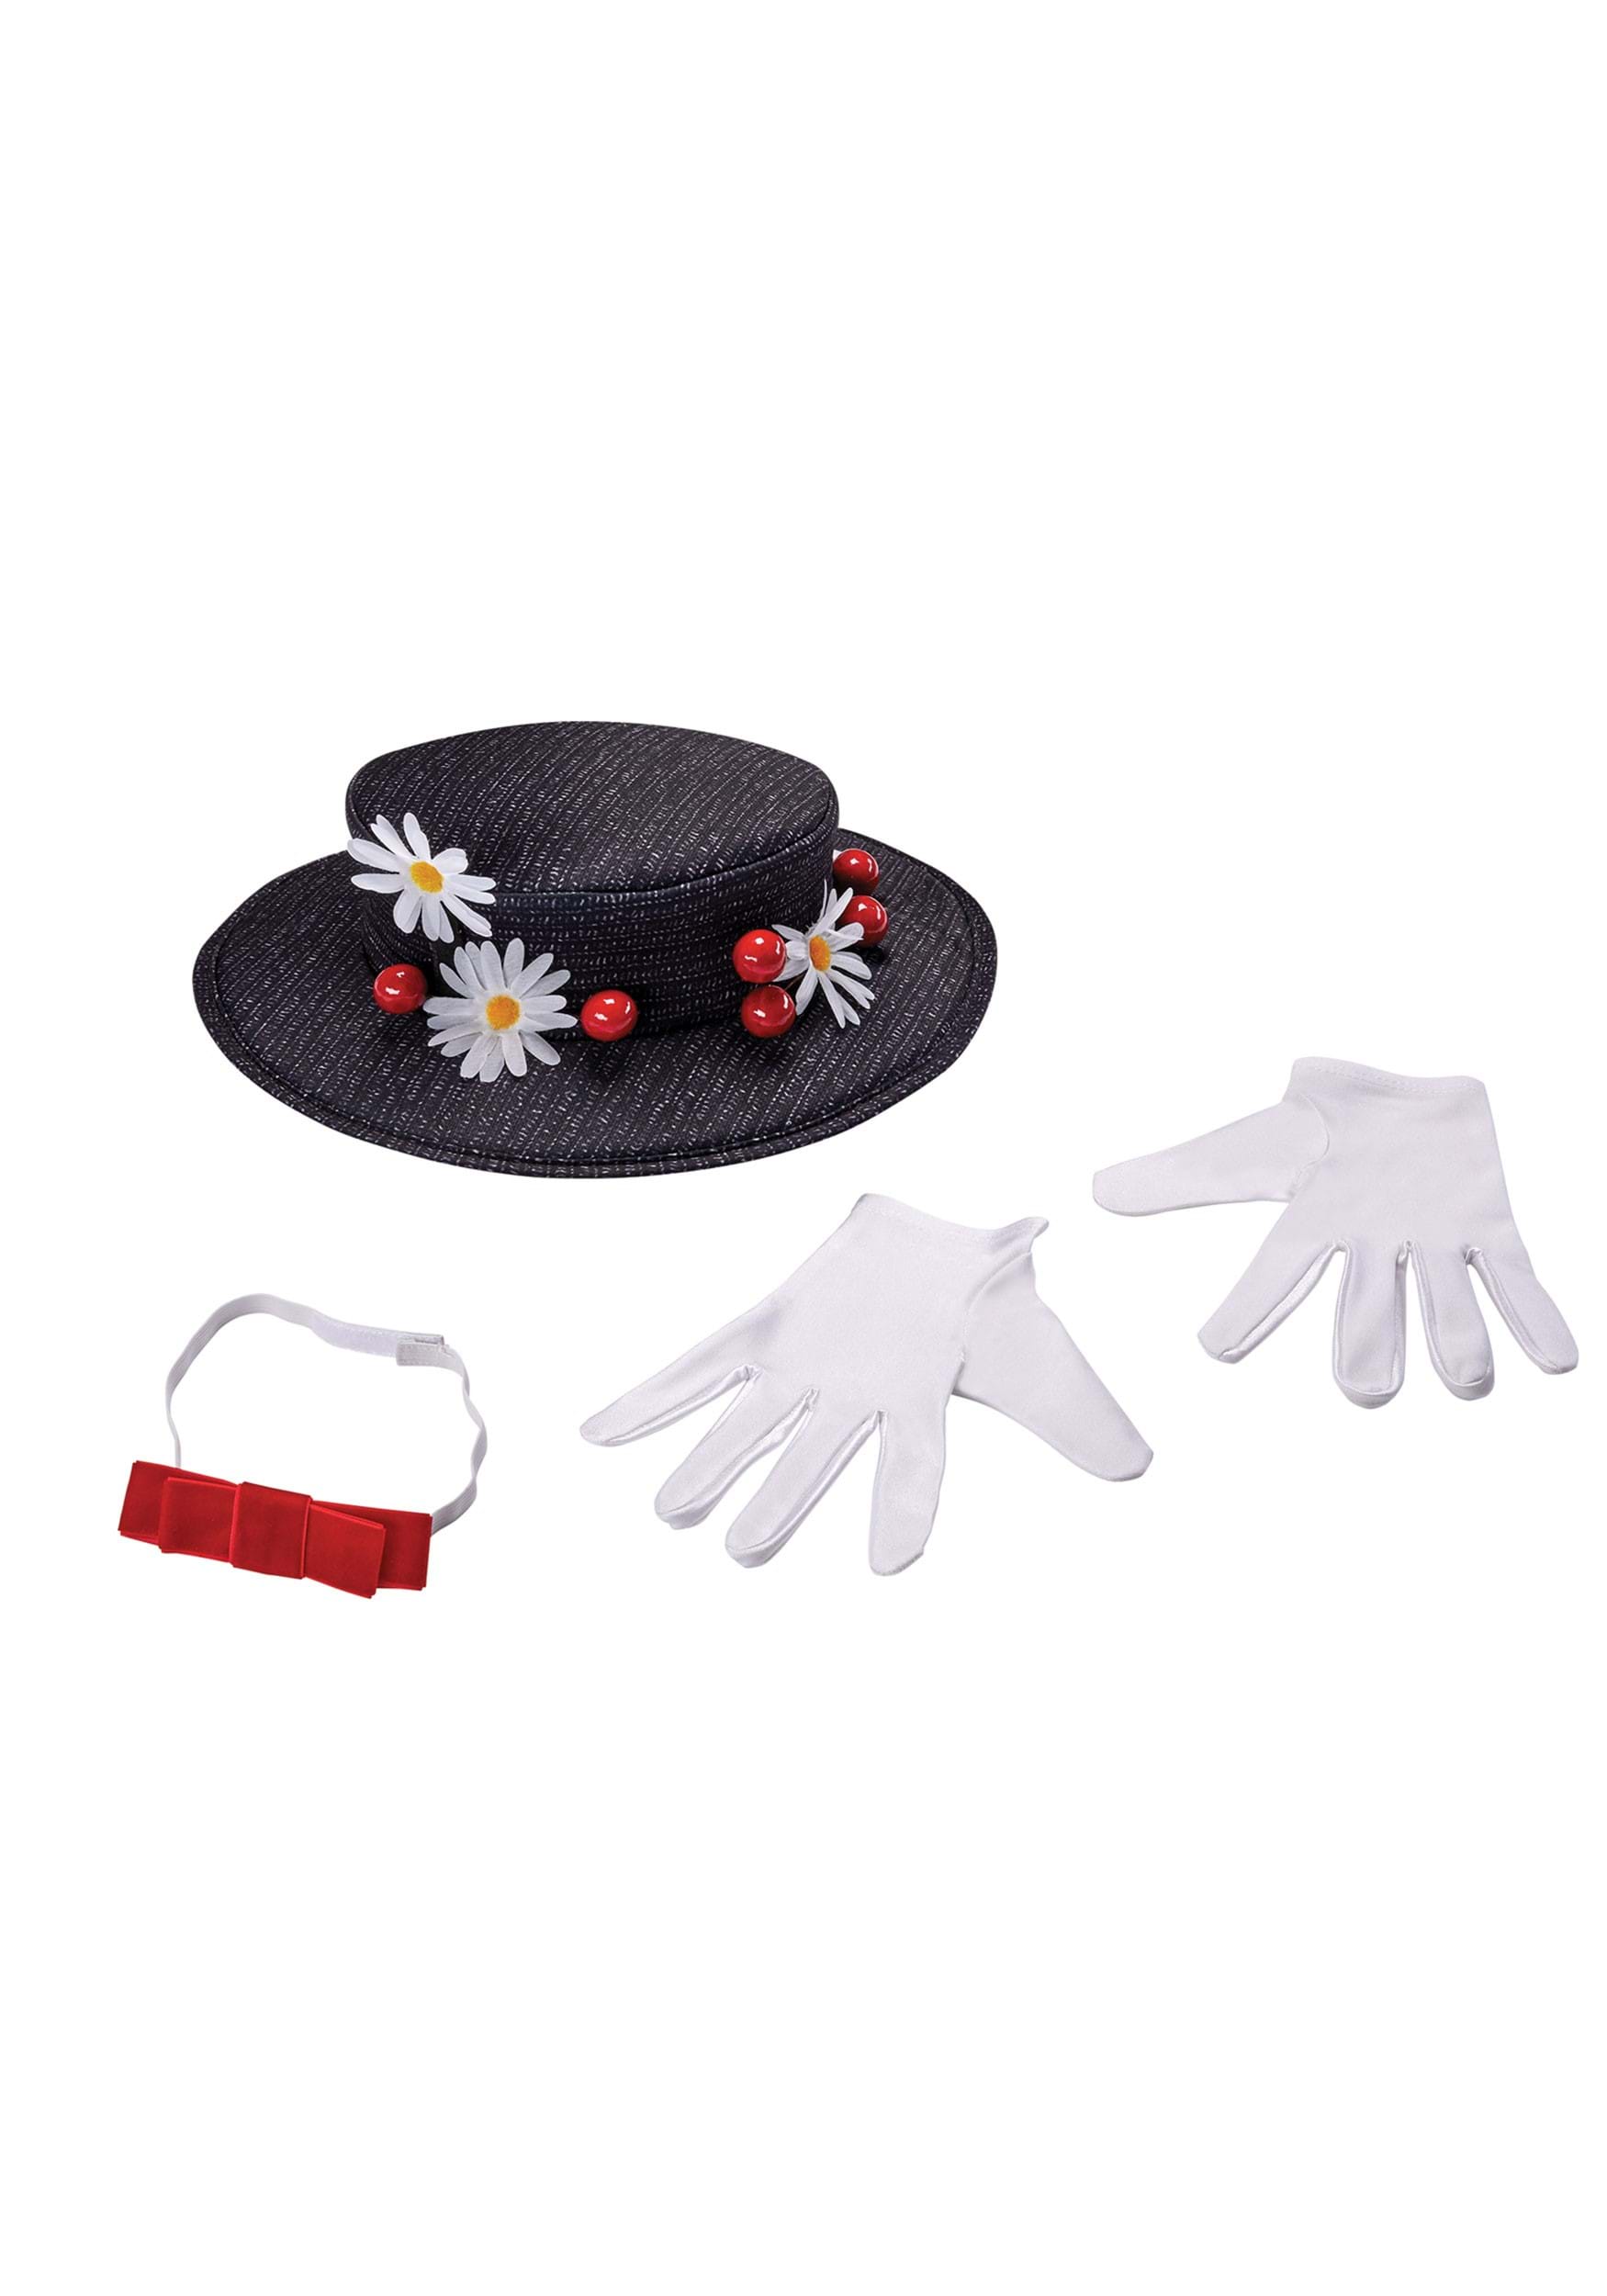 Disney Mary Poppins Classic Black Hat and Scarf Set